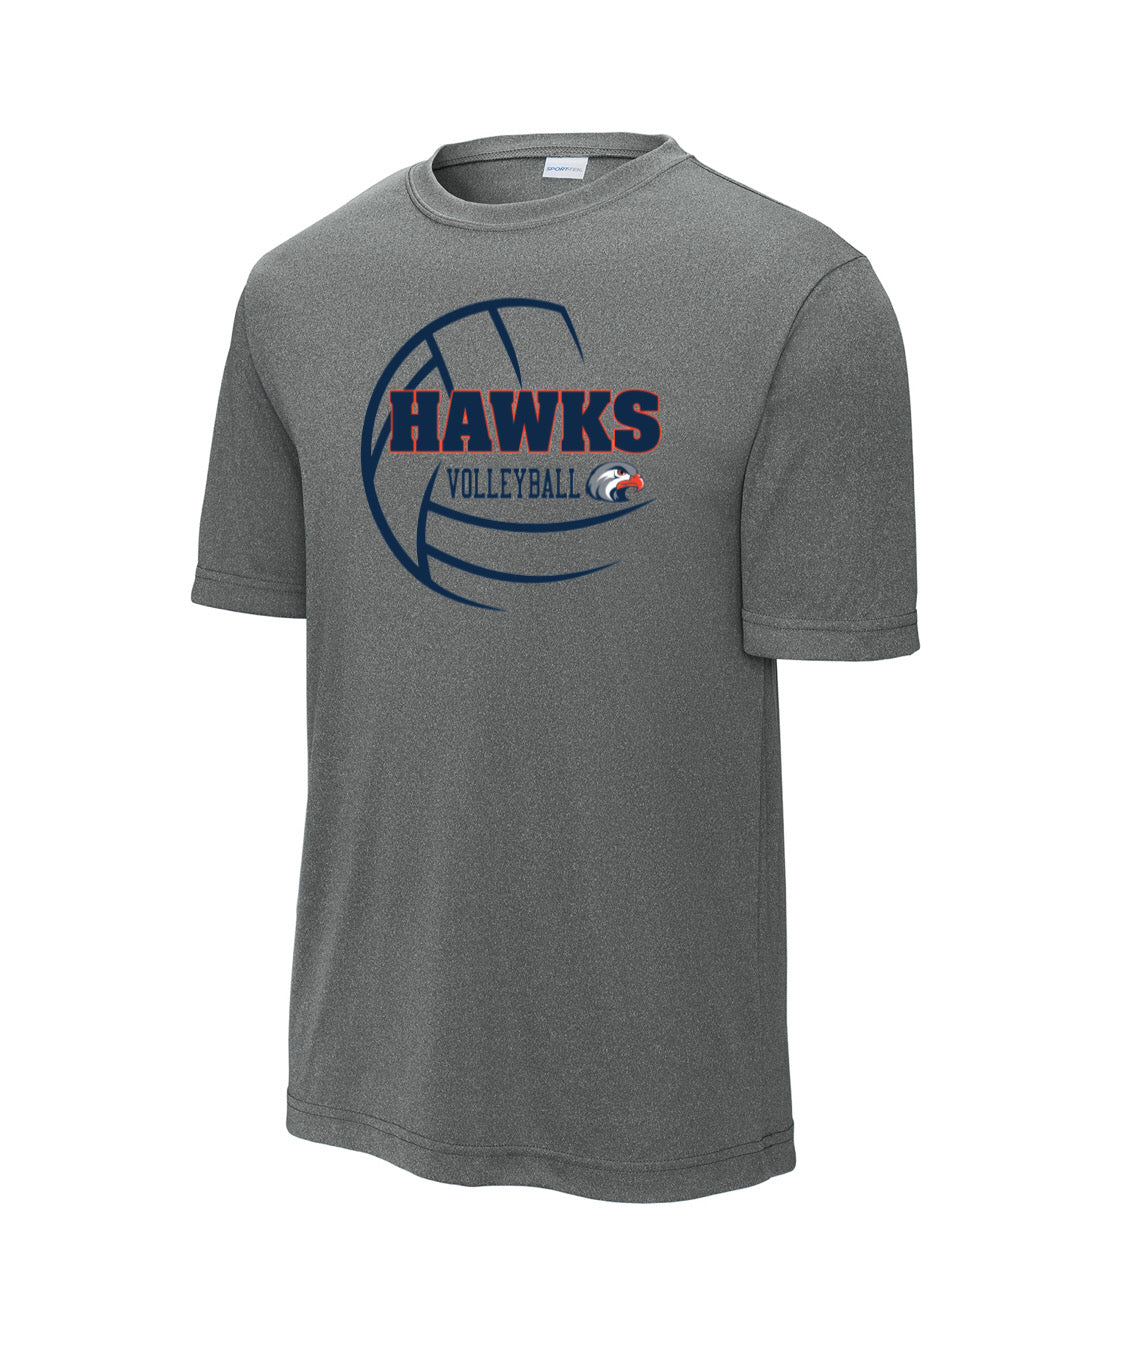 Hawks Volleyball Performance T-Shirt - Multiple Color Options -(ALL PRODUCTS WILL BE DELIVERED TO SCHOOL)